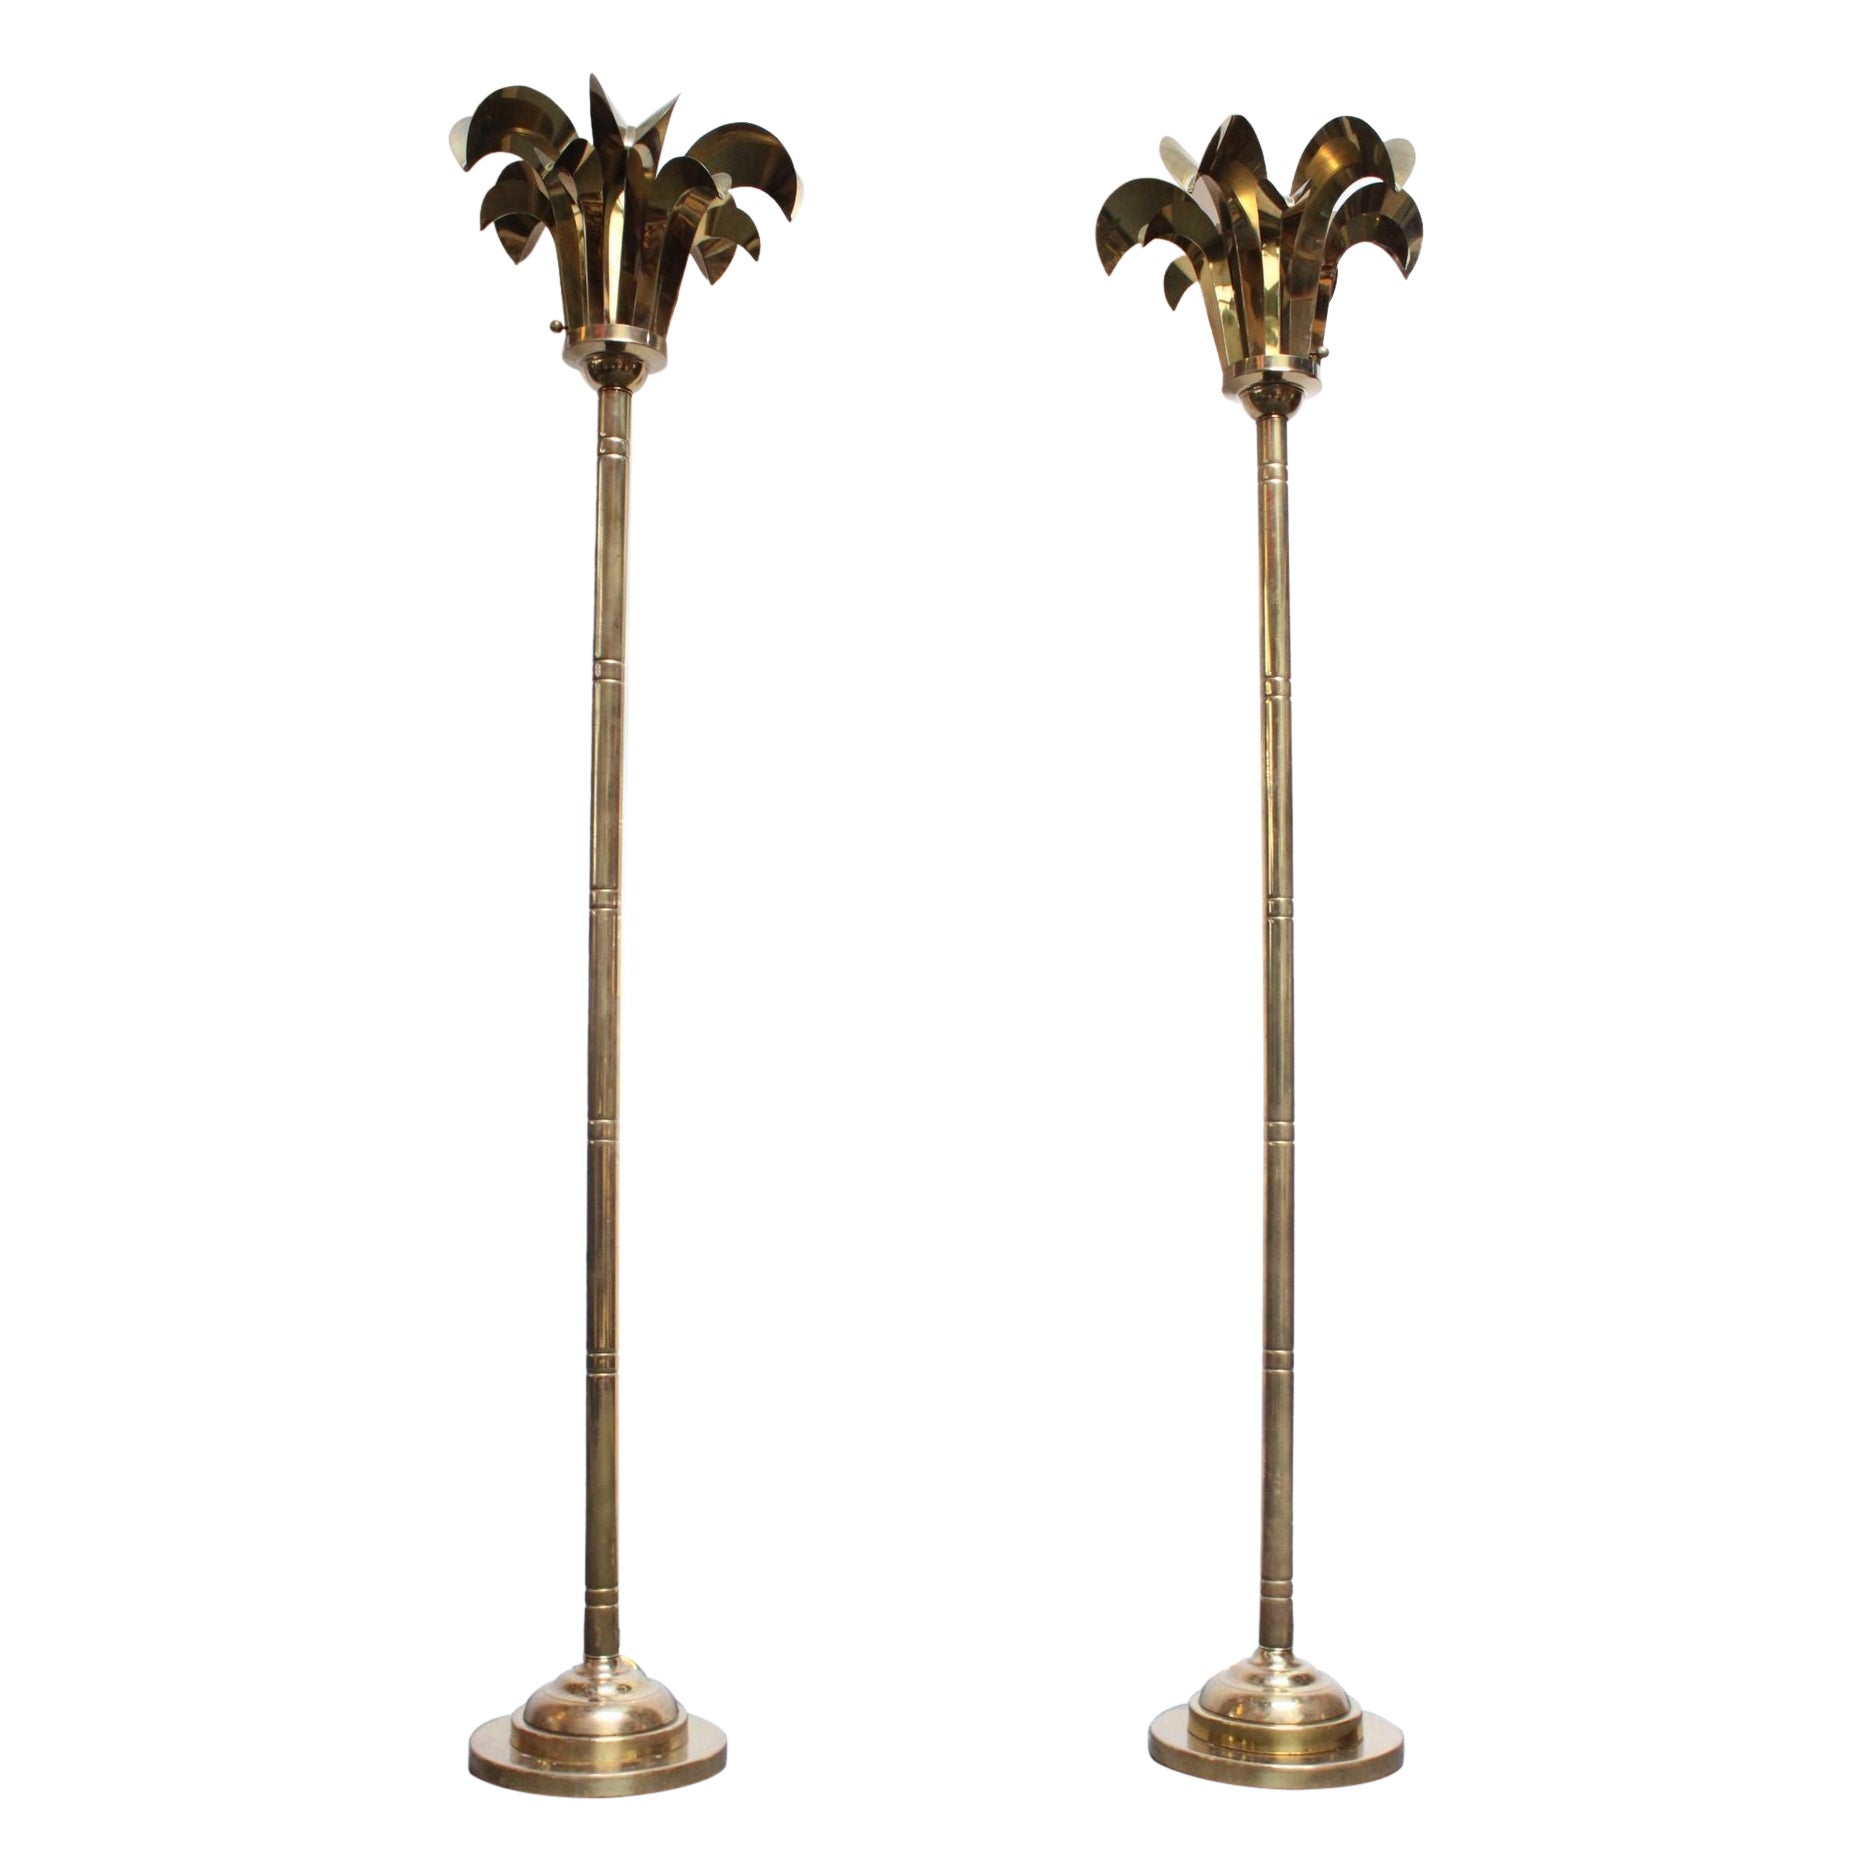 Pair of Vintage Brass "Palm Tree Frond" Floor Lamps by Hart Associates